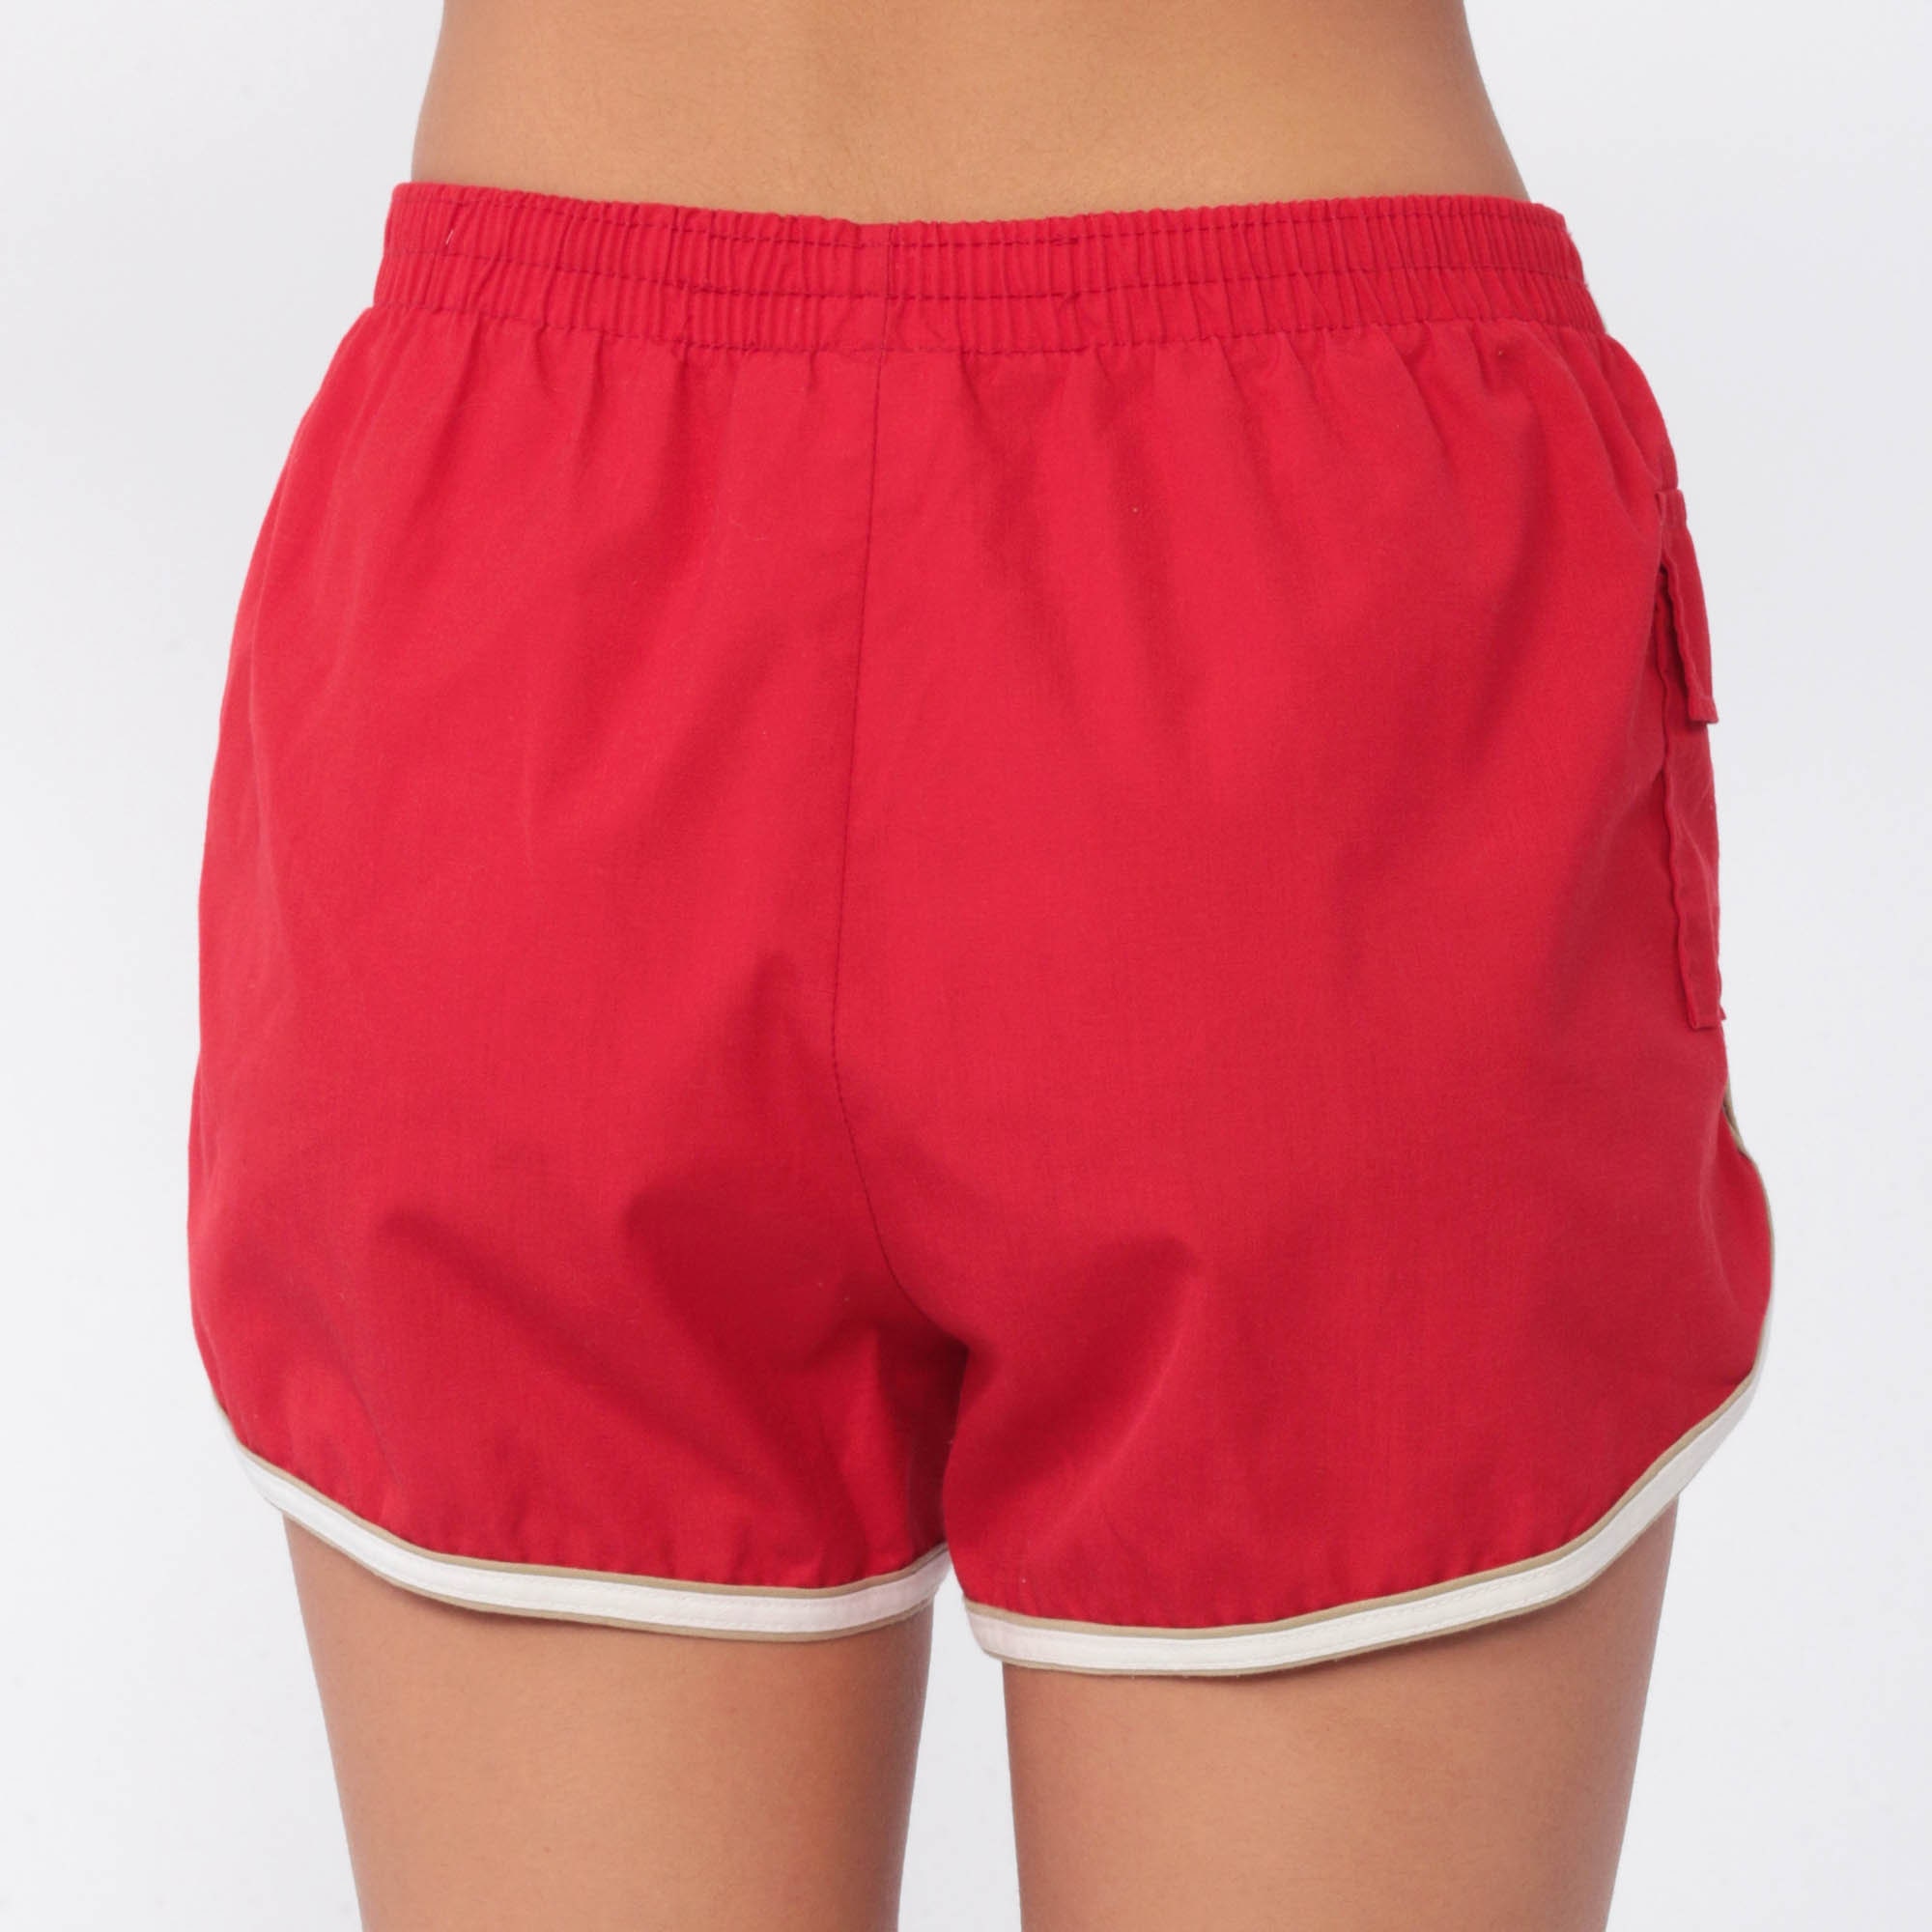 6 Day Red Workout Shorts for Burn Fat fast